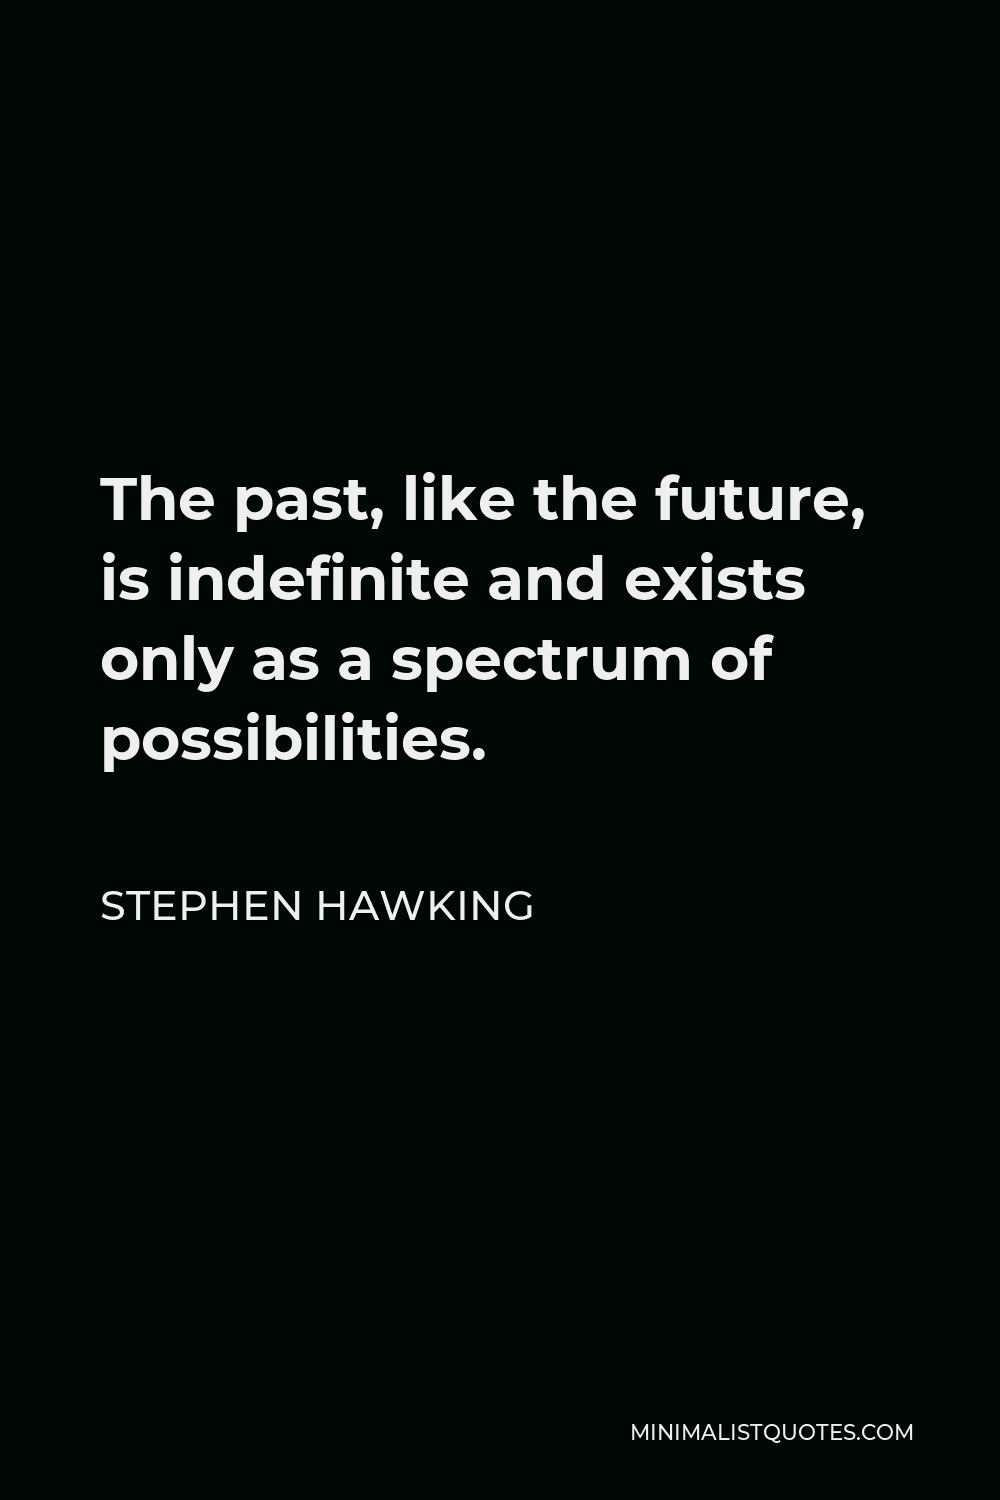 Stephen Hawking Quote - The past, like the future, is indefinite and exists only as a spectrum of possibilities.